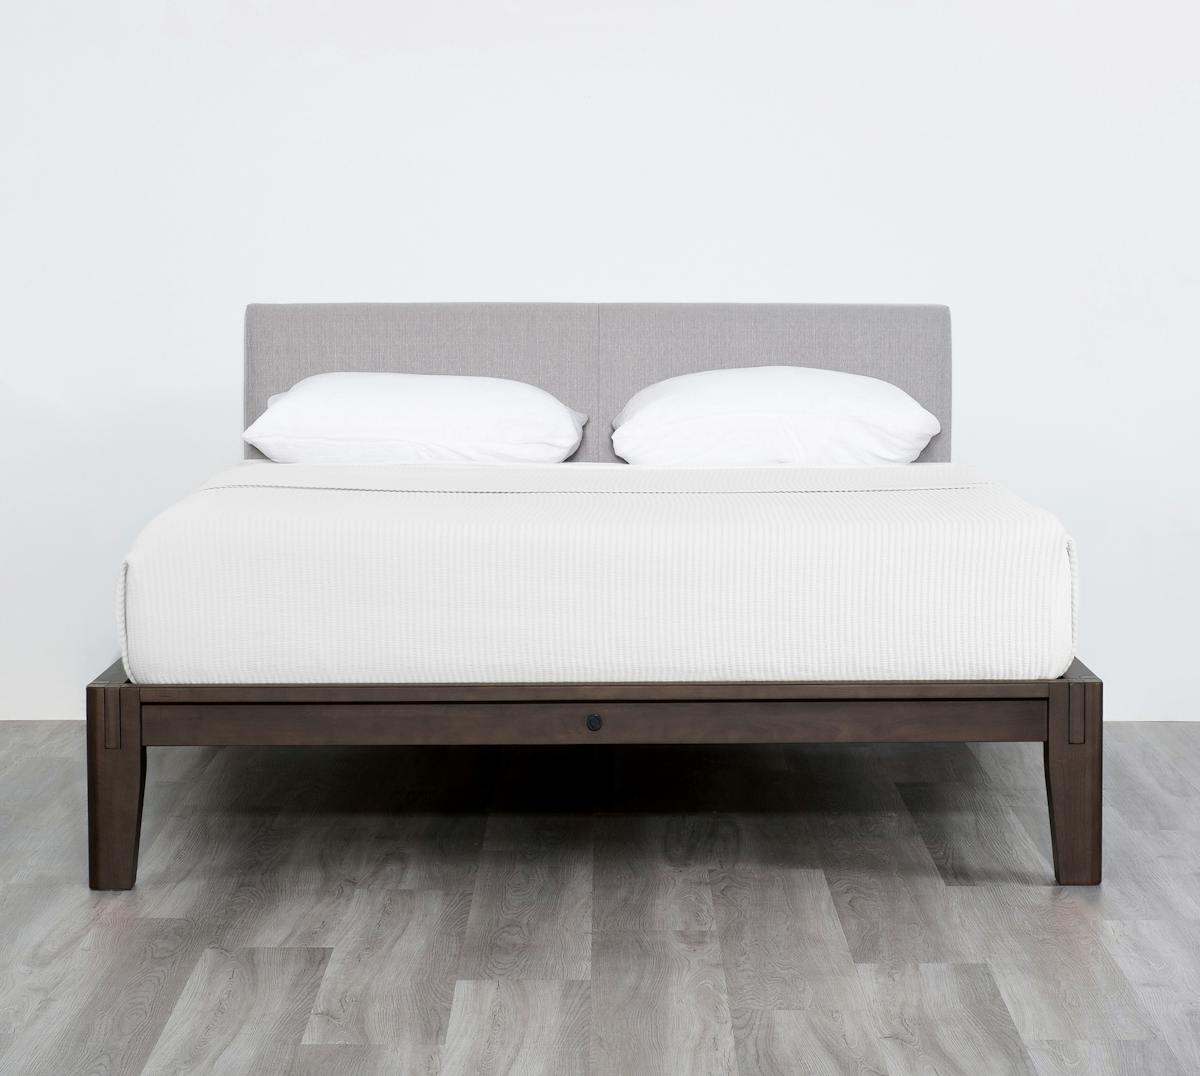 The Bed (Espresso / Fog Grey) Product